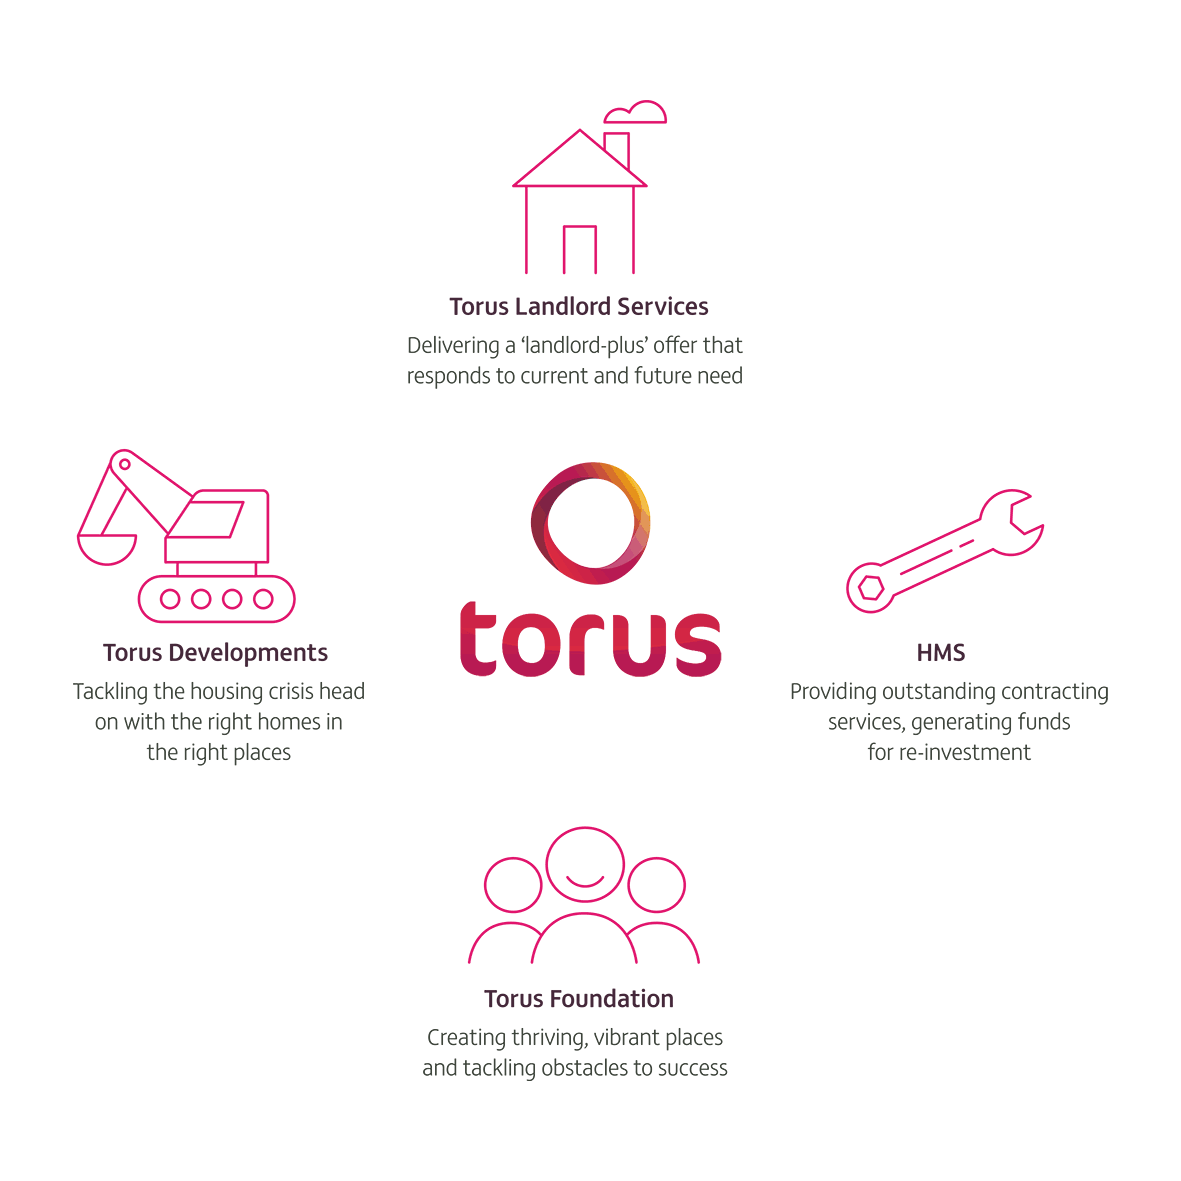 Animated diagram showing the Torus Group Operating Model